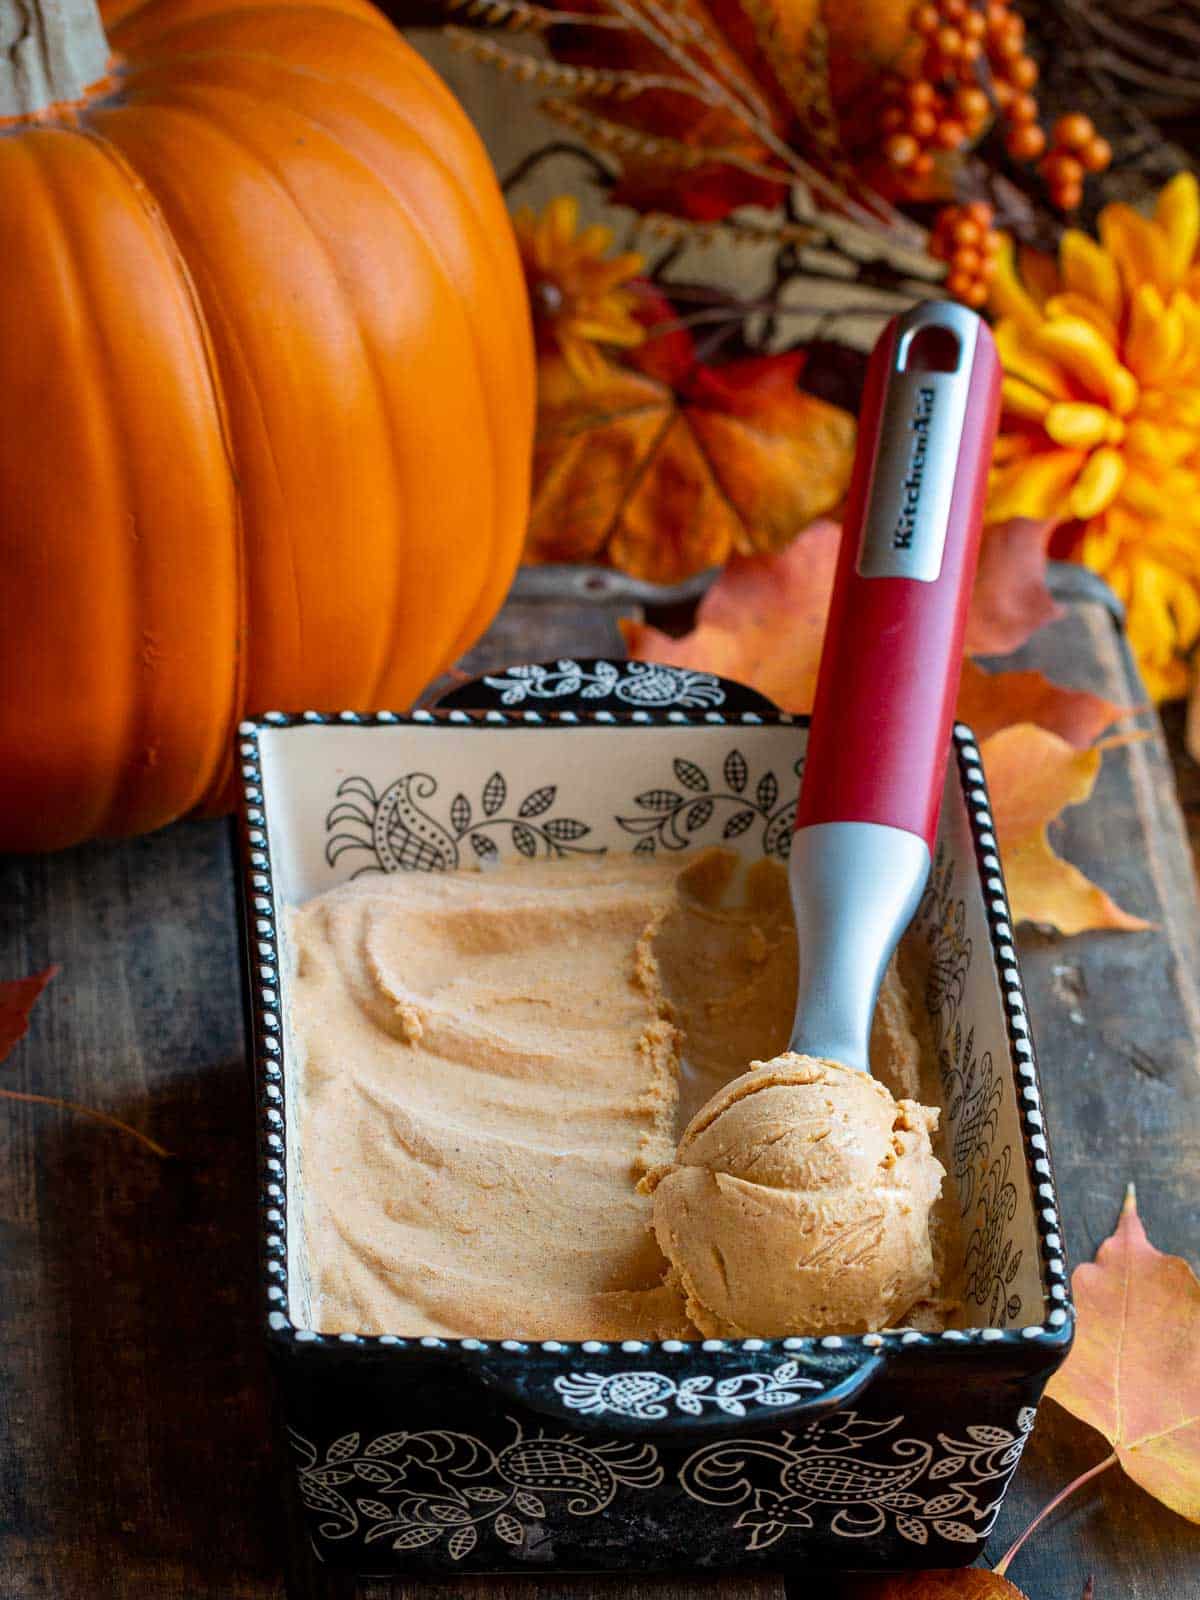 Dairy free pumpkin ice cream in a black and white pan with a red ice cream scoop with a scoop in it.